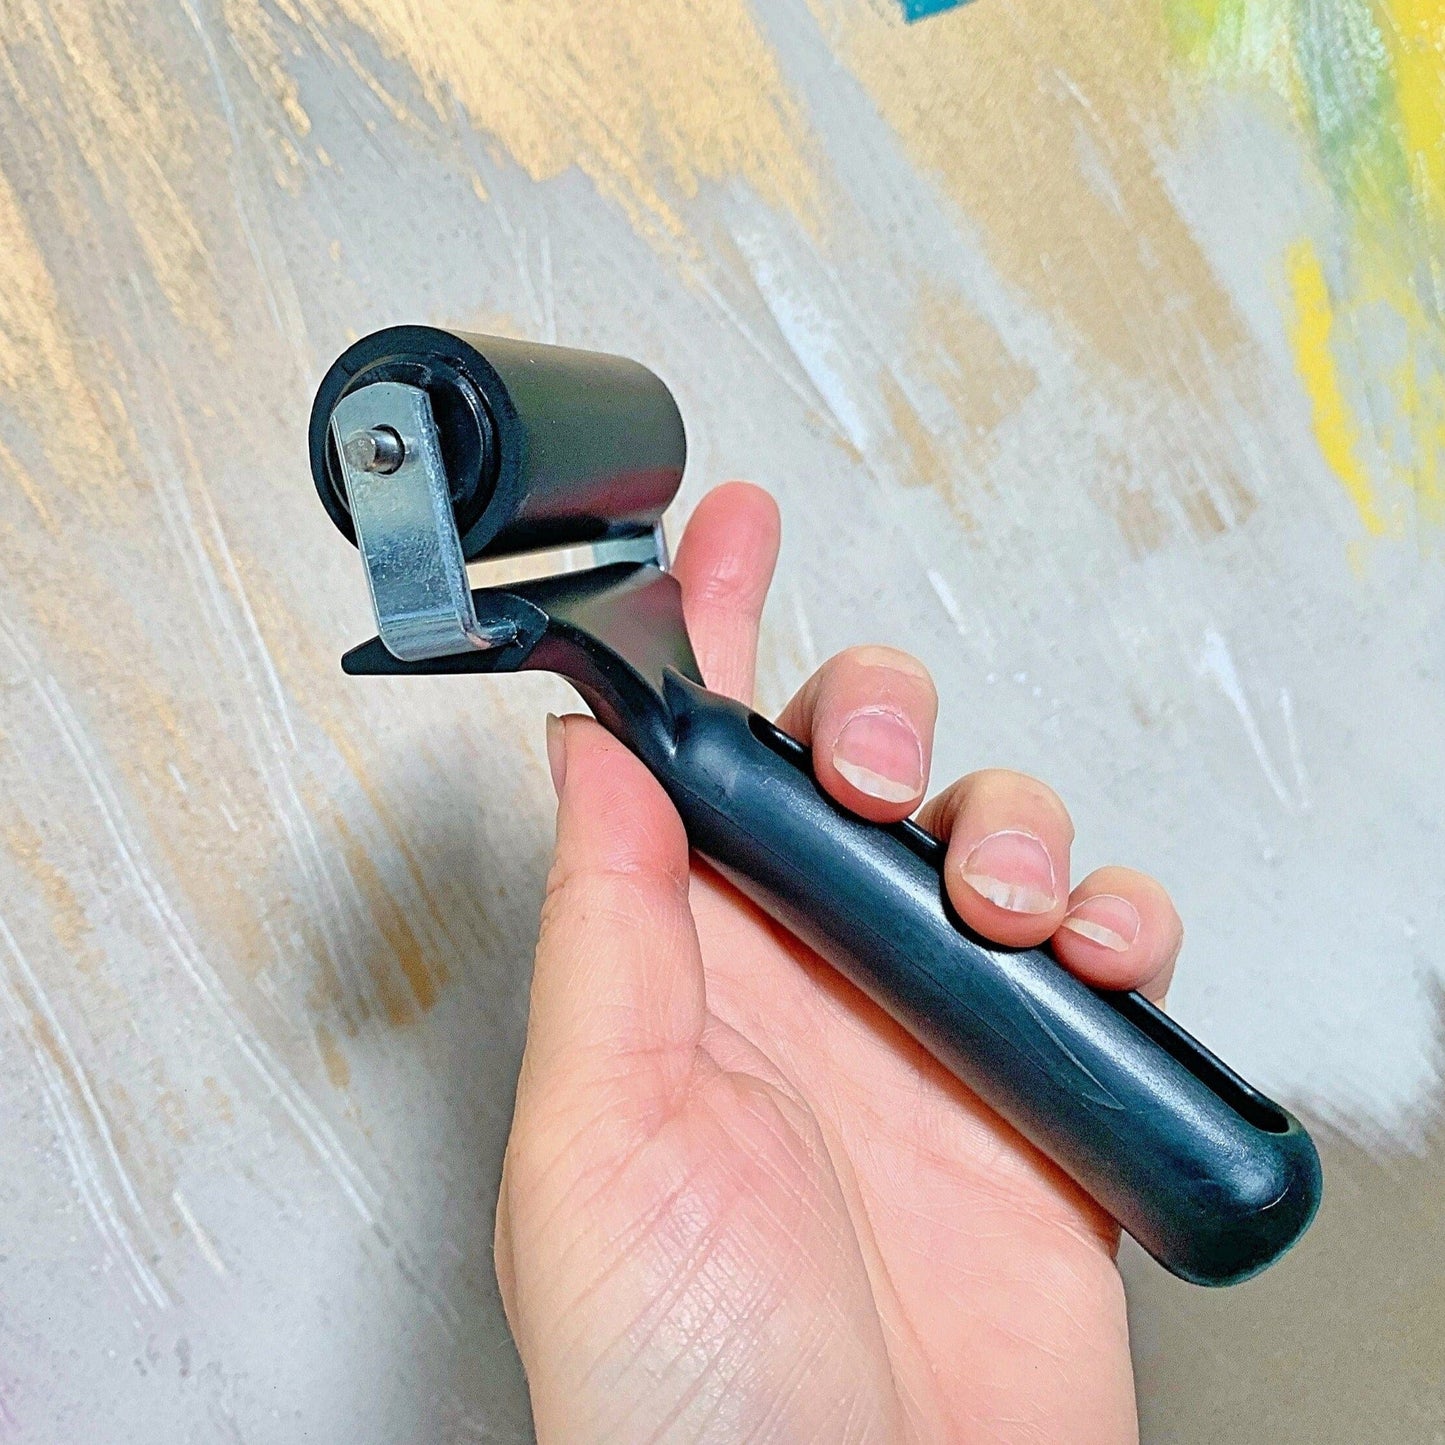 Student quality rubber roller